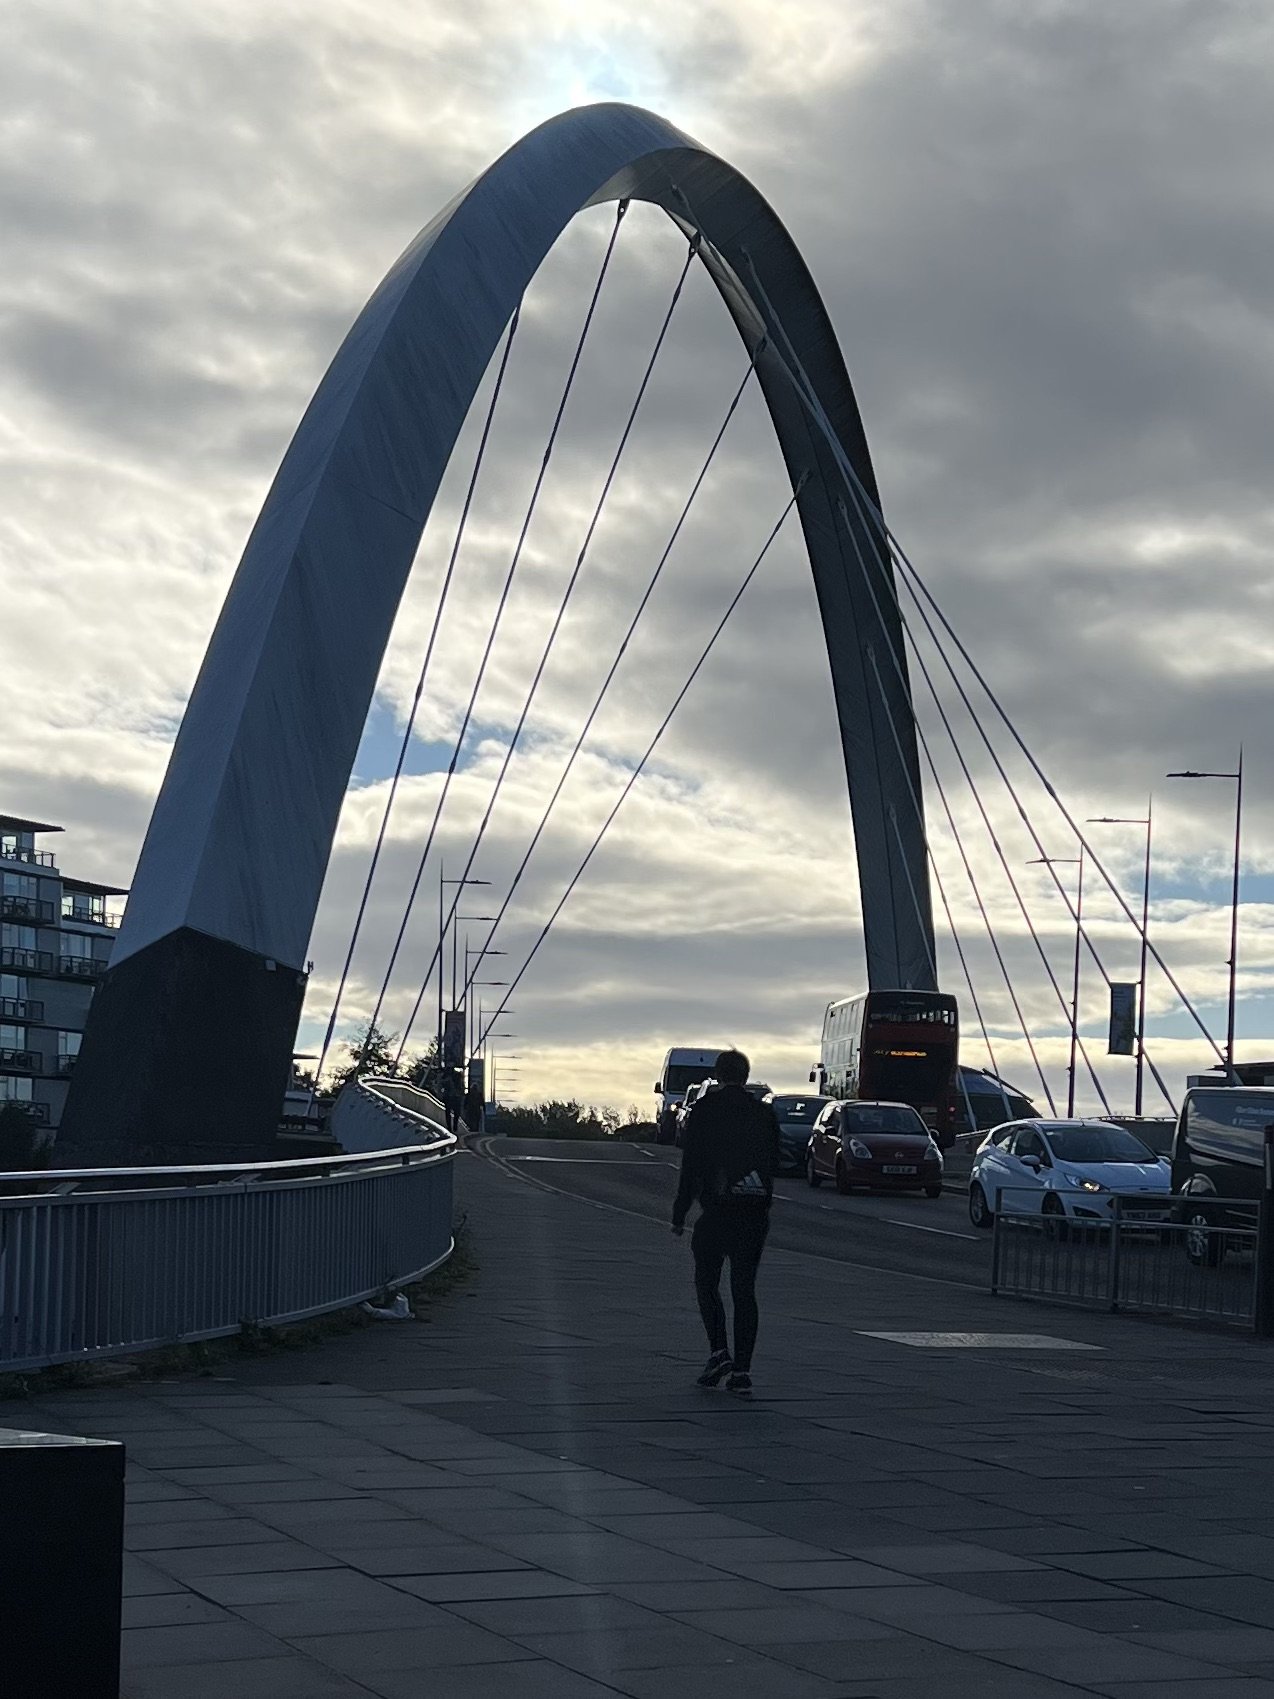 The Clyde Arc on the river, Glasgow